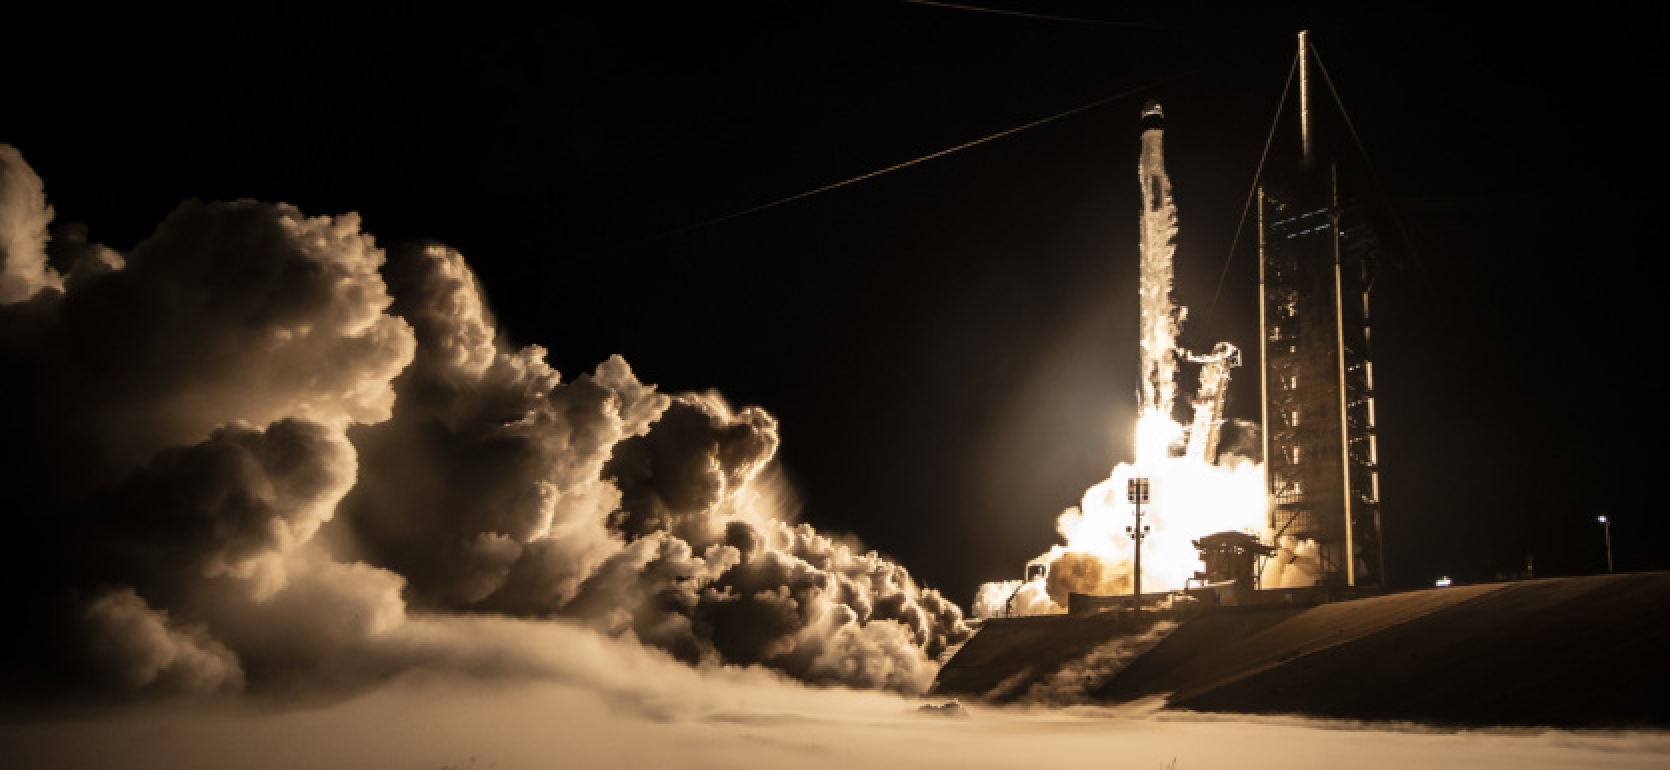 SpaceX launched three Falcon 9s in less than 24 hours, and two of them in a record 1 hour 51 minutes.